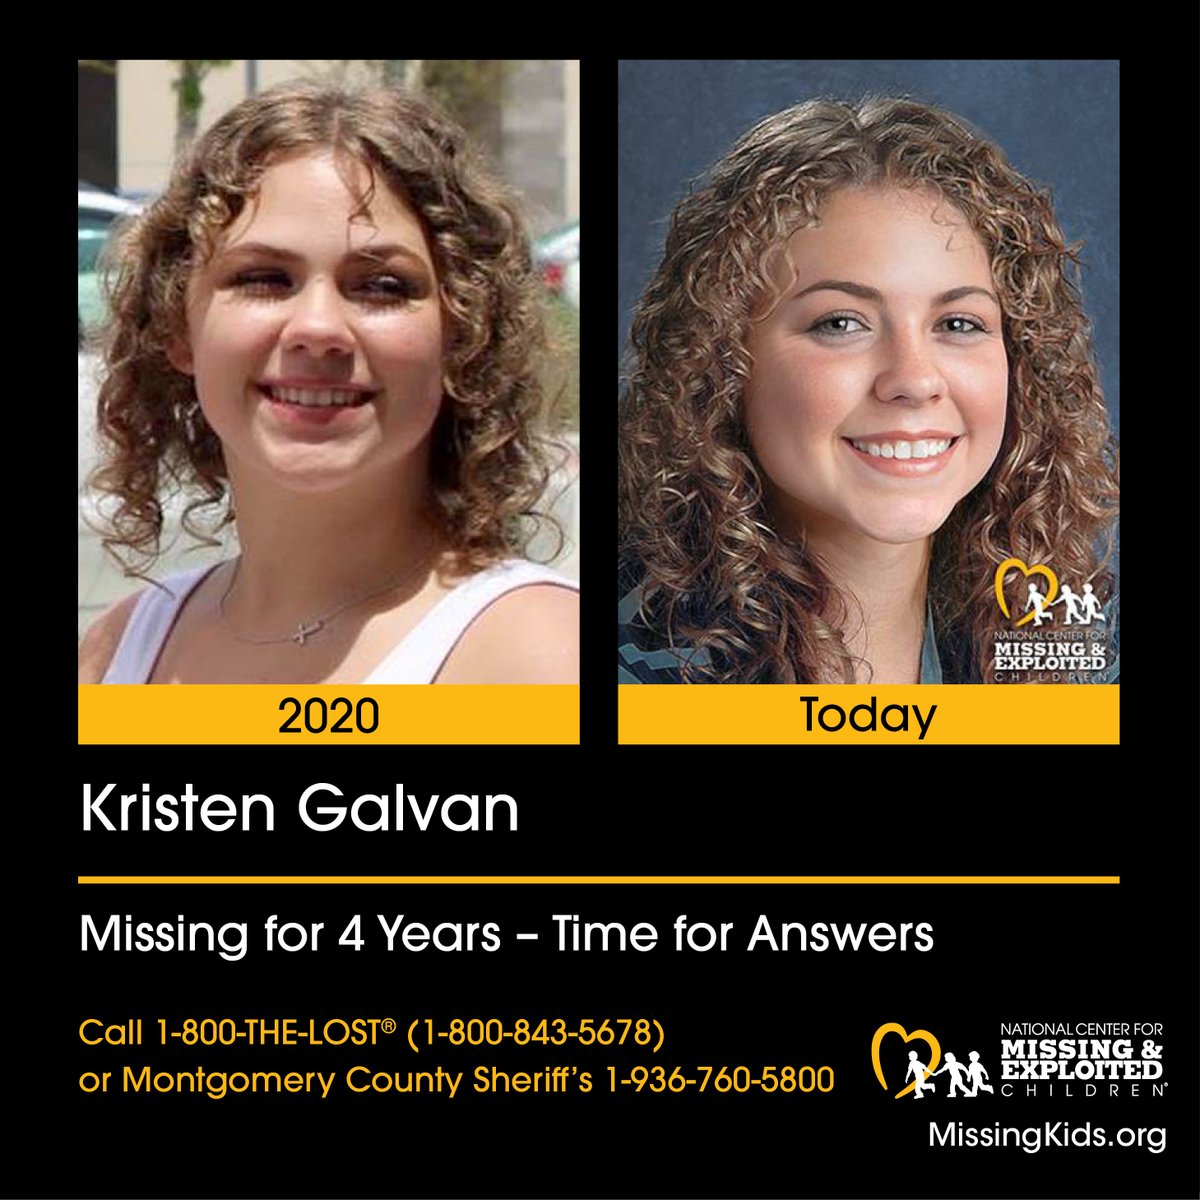 “We love and miss you so, so very much Kristen. We continue to search and hope to find you in 2024.” -Kristen’s Mom, Robyn. January 2, 2024, marked 4 years since Kristen Galvan disappeared from Spring, Texas in 2020. Today, she is 19 years old. Her family will never stop